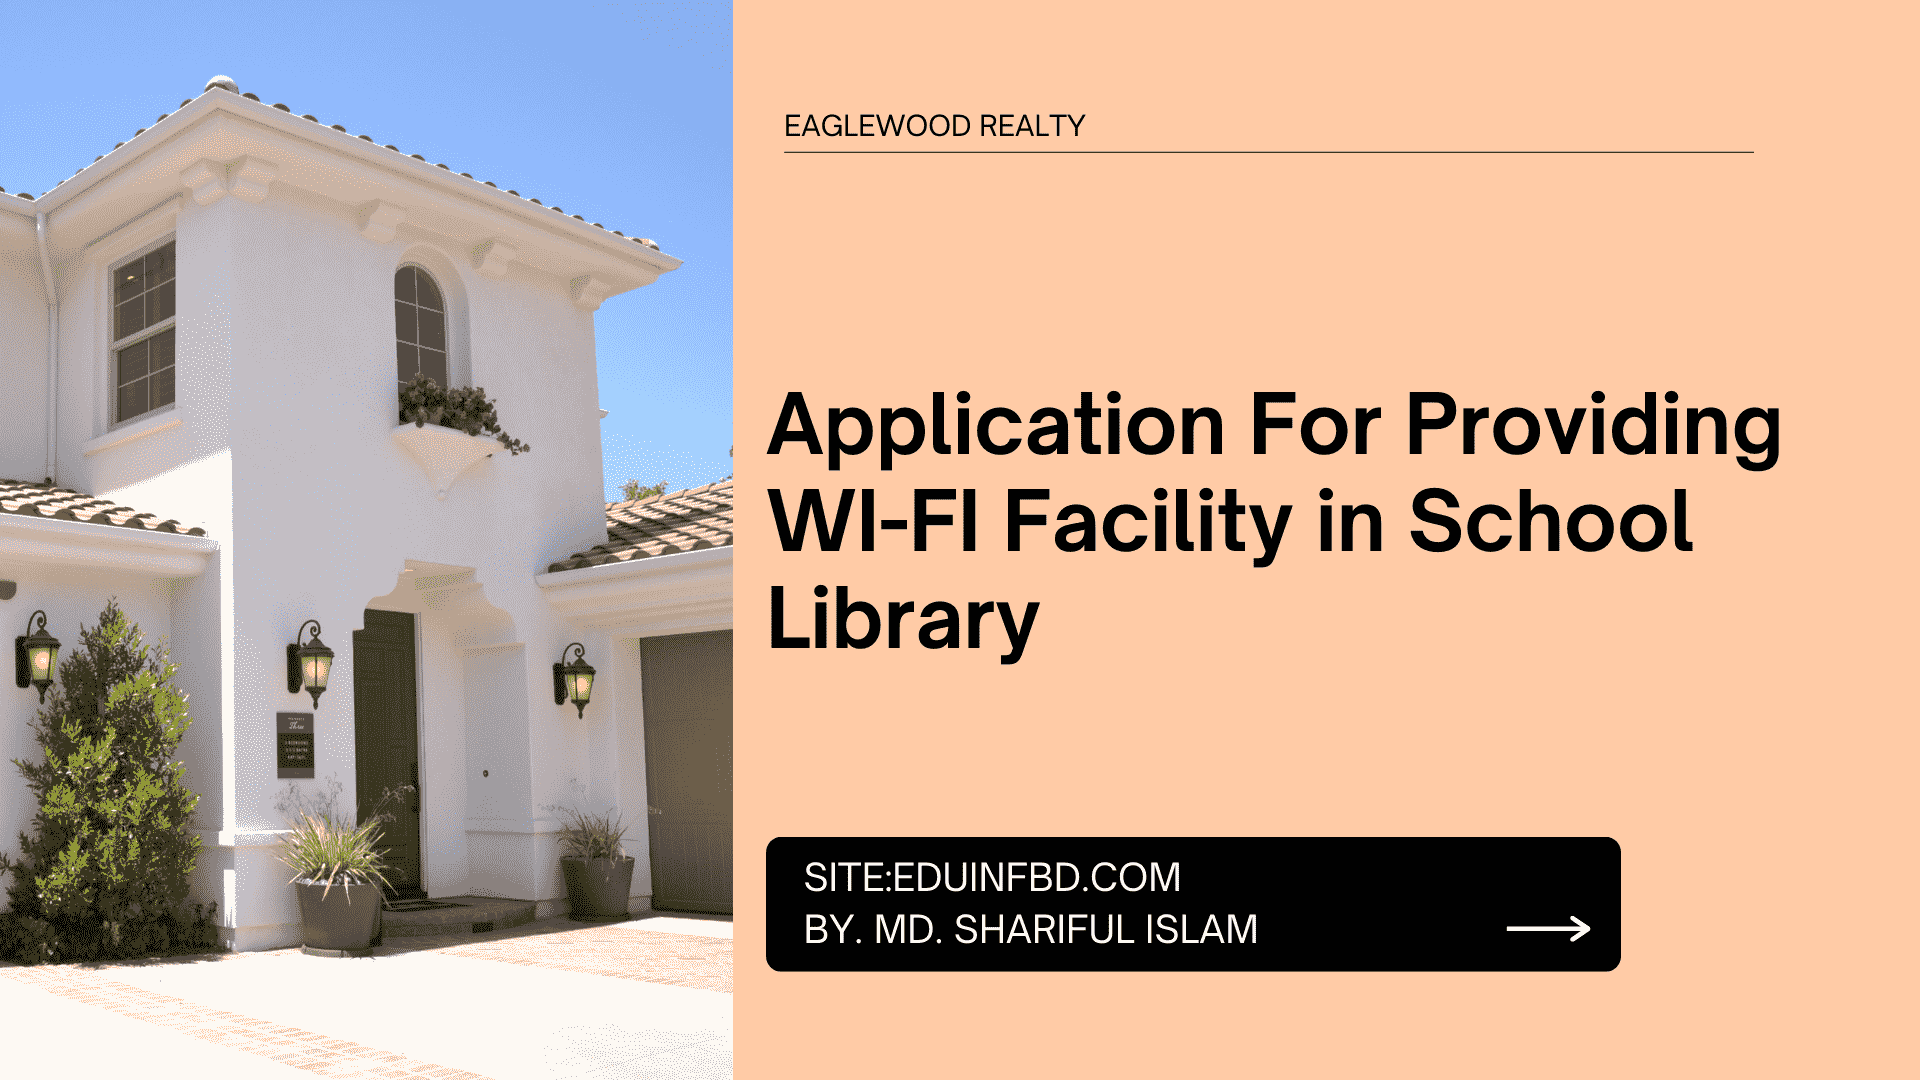 Application For Providing WI-FI Facility in School Library